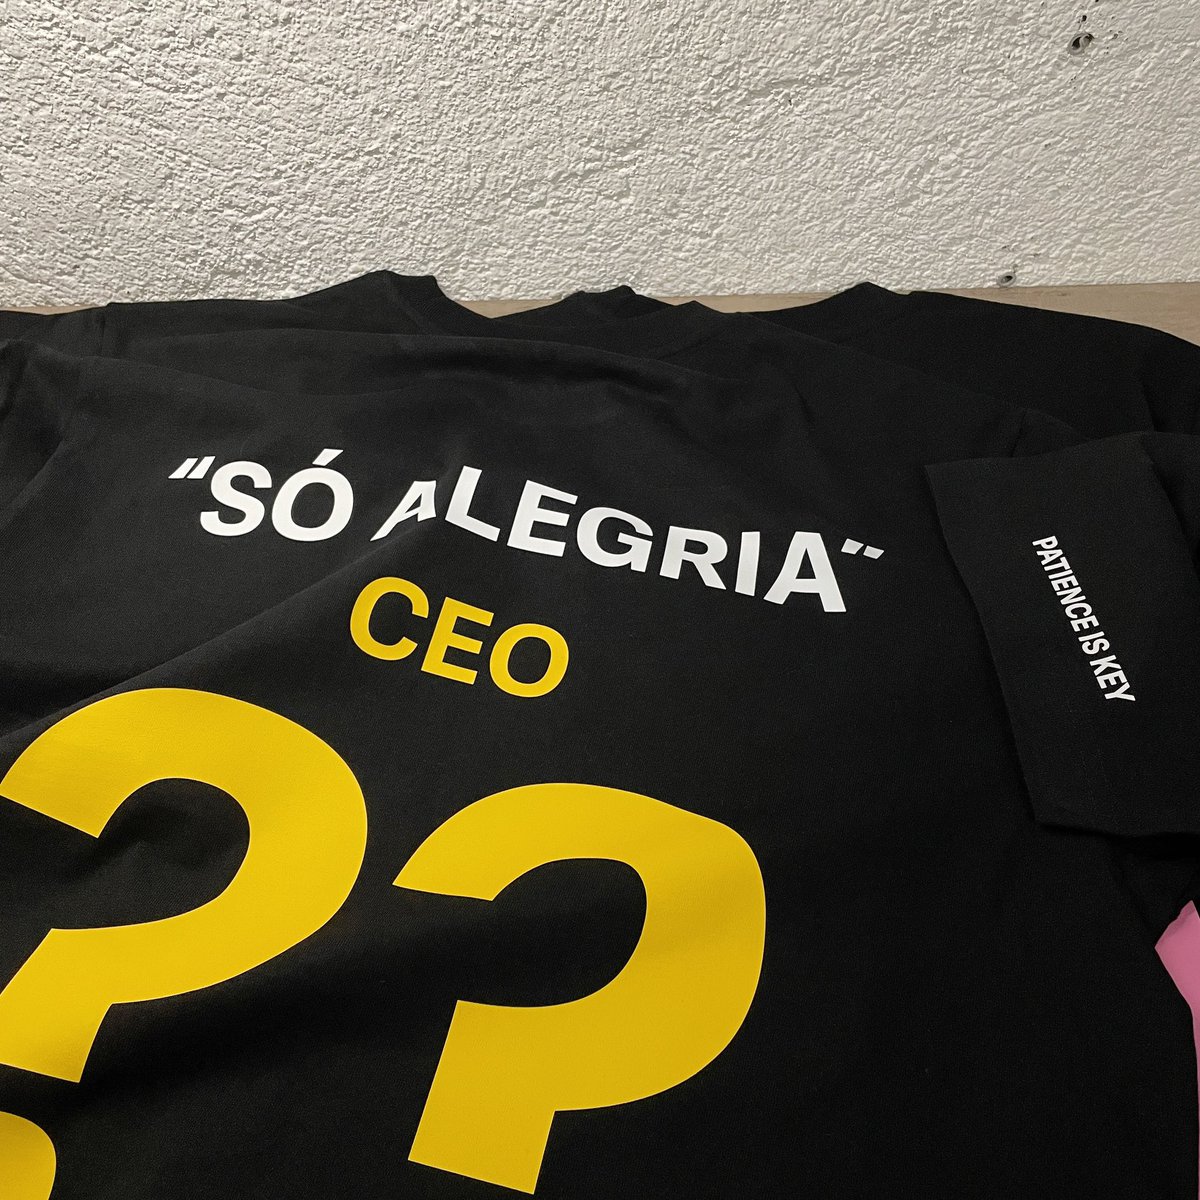 The New t-shirts for @ alegriaeventslu 🔥
As always it was a pleasure, @ dylan.almeida01 @ alegriaeventslu thank you for your trust! 

#emcustomslxb #luxembourg #tshirtdesign #flocage #tshirt #customservice #printdesign #print #dtf #dtfprinting #dtftransfers #clothingproduction